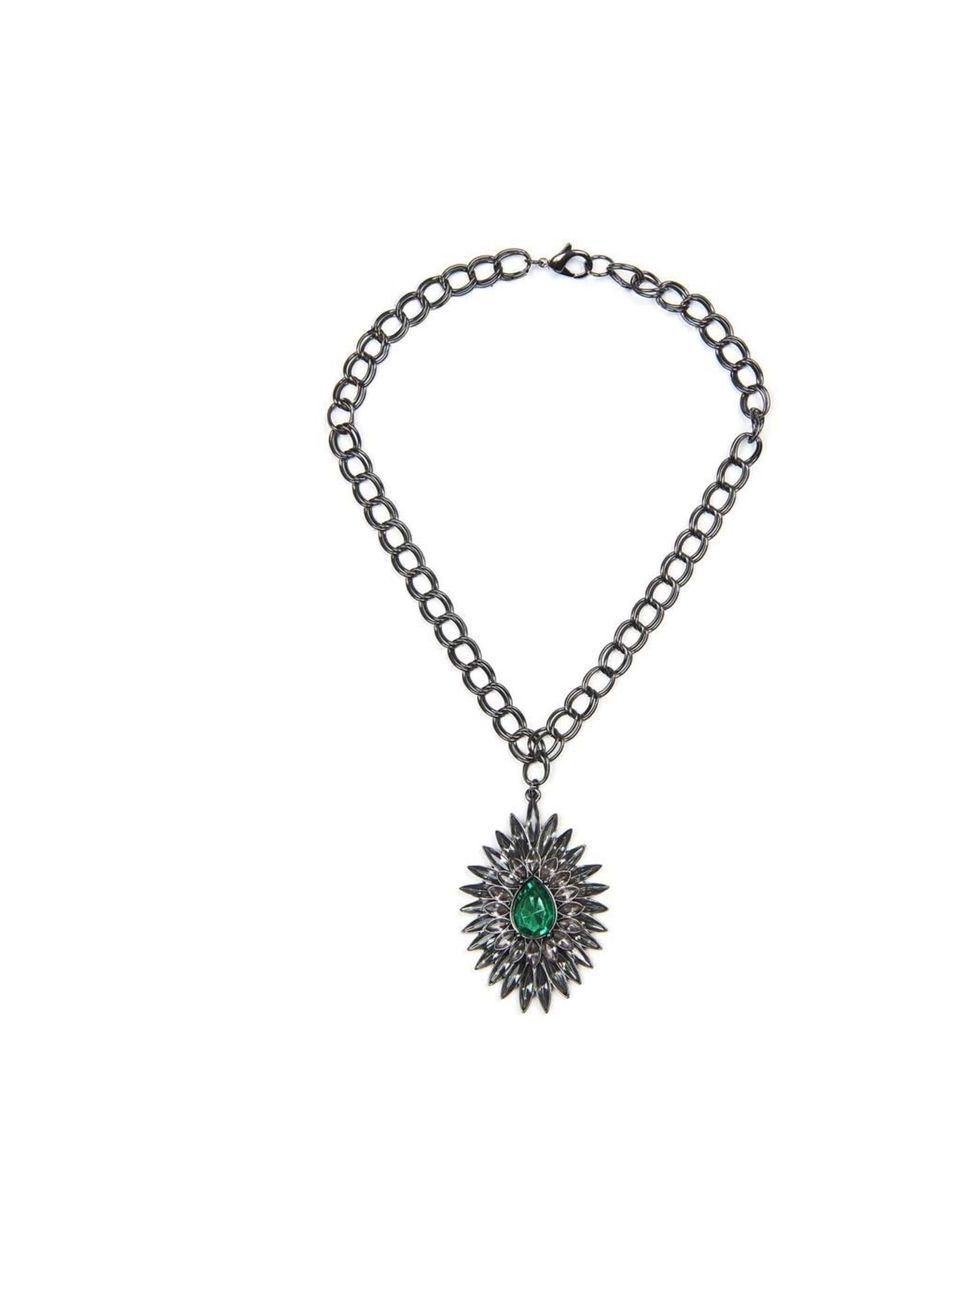 <p>Mango Touch Crystal embellished maxi pendant choker £29.99 from <a href="http://shop.mango.com/GB/p0/mango/accessories/jewellery/touch---crystal-embellished-maxi-pendant-chocker/?id=76637669_02&amp;n=1&amp;s=accesorios.bisuteria&amp;ie=0&amp;m=&amp;ts=